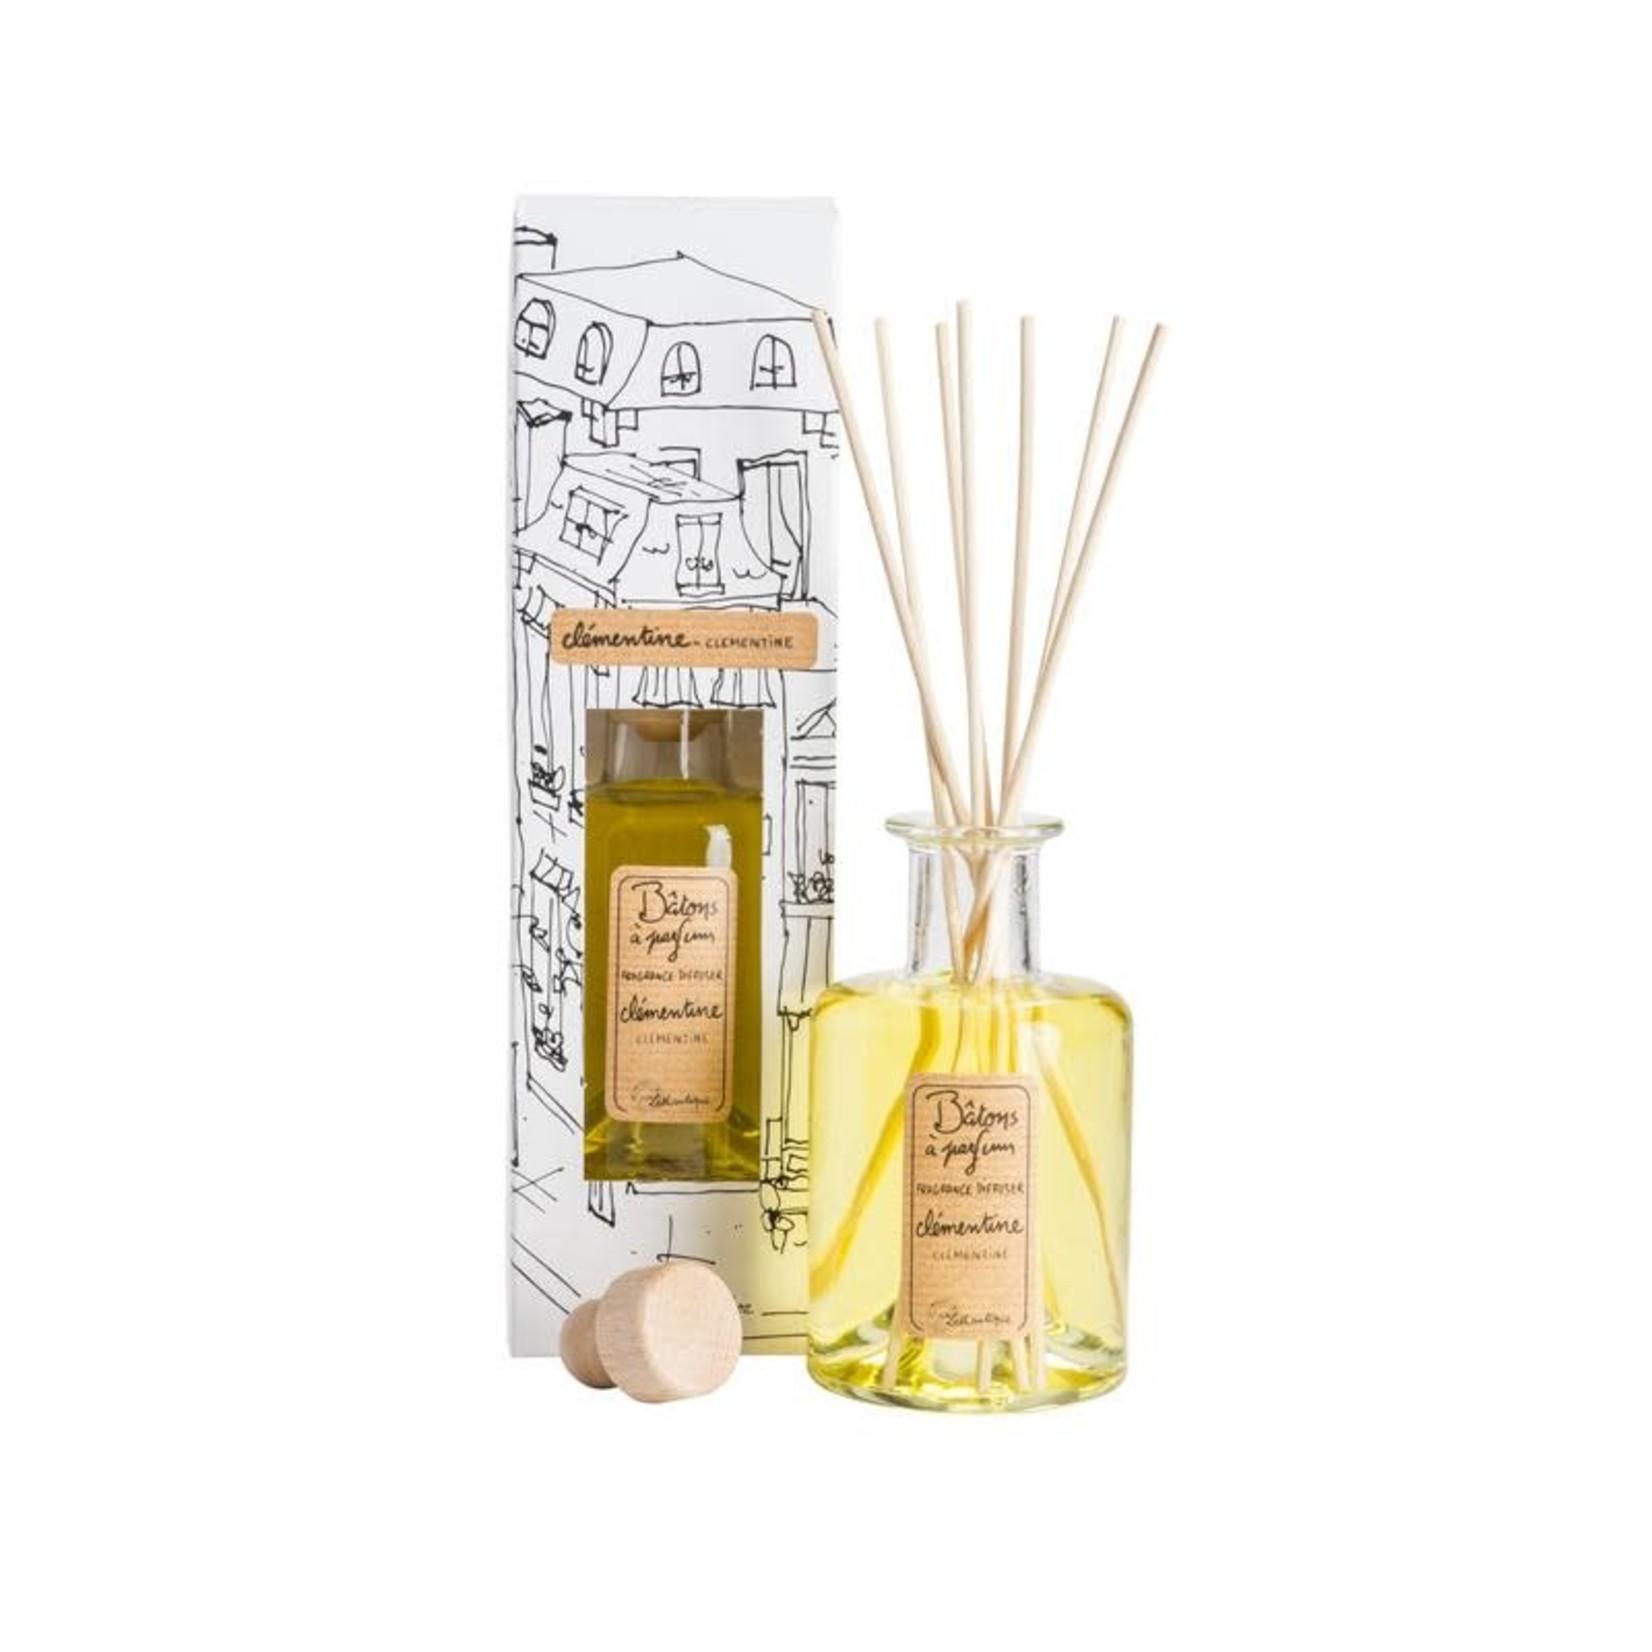 Clementine - Fragrance Diffuser